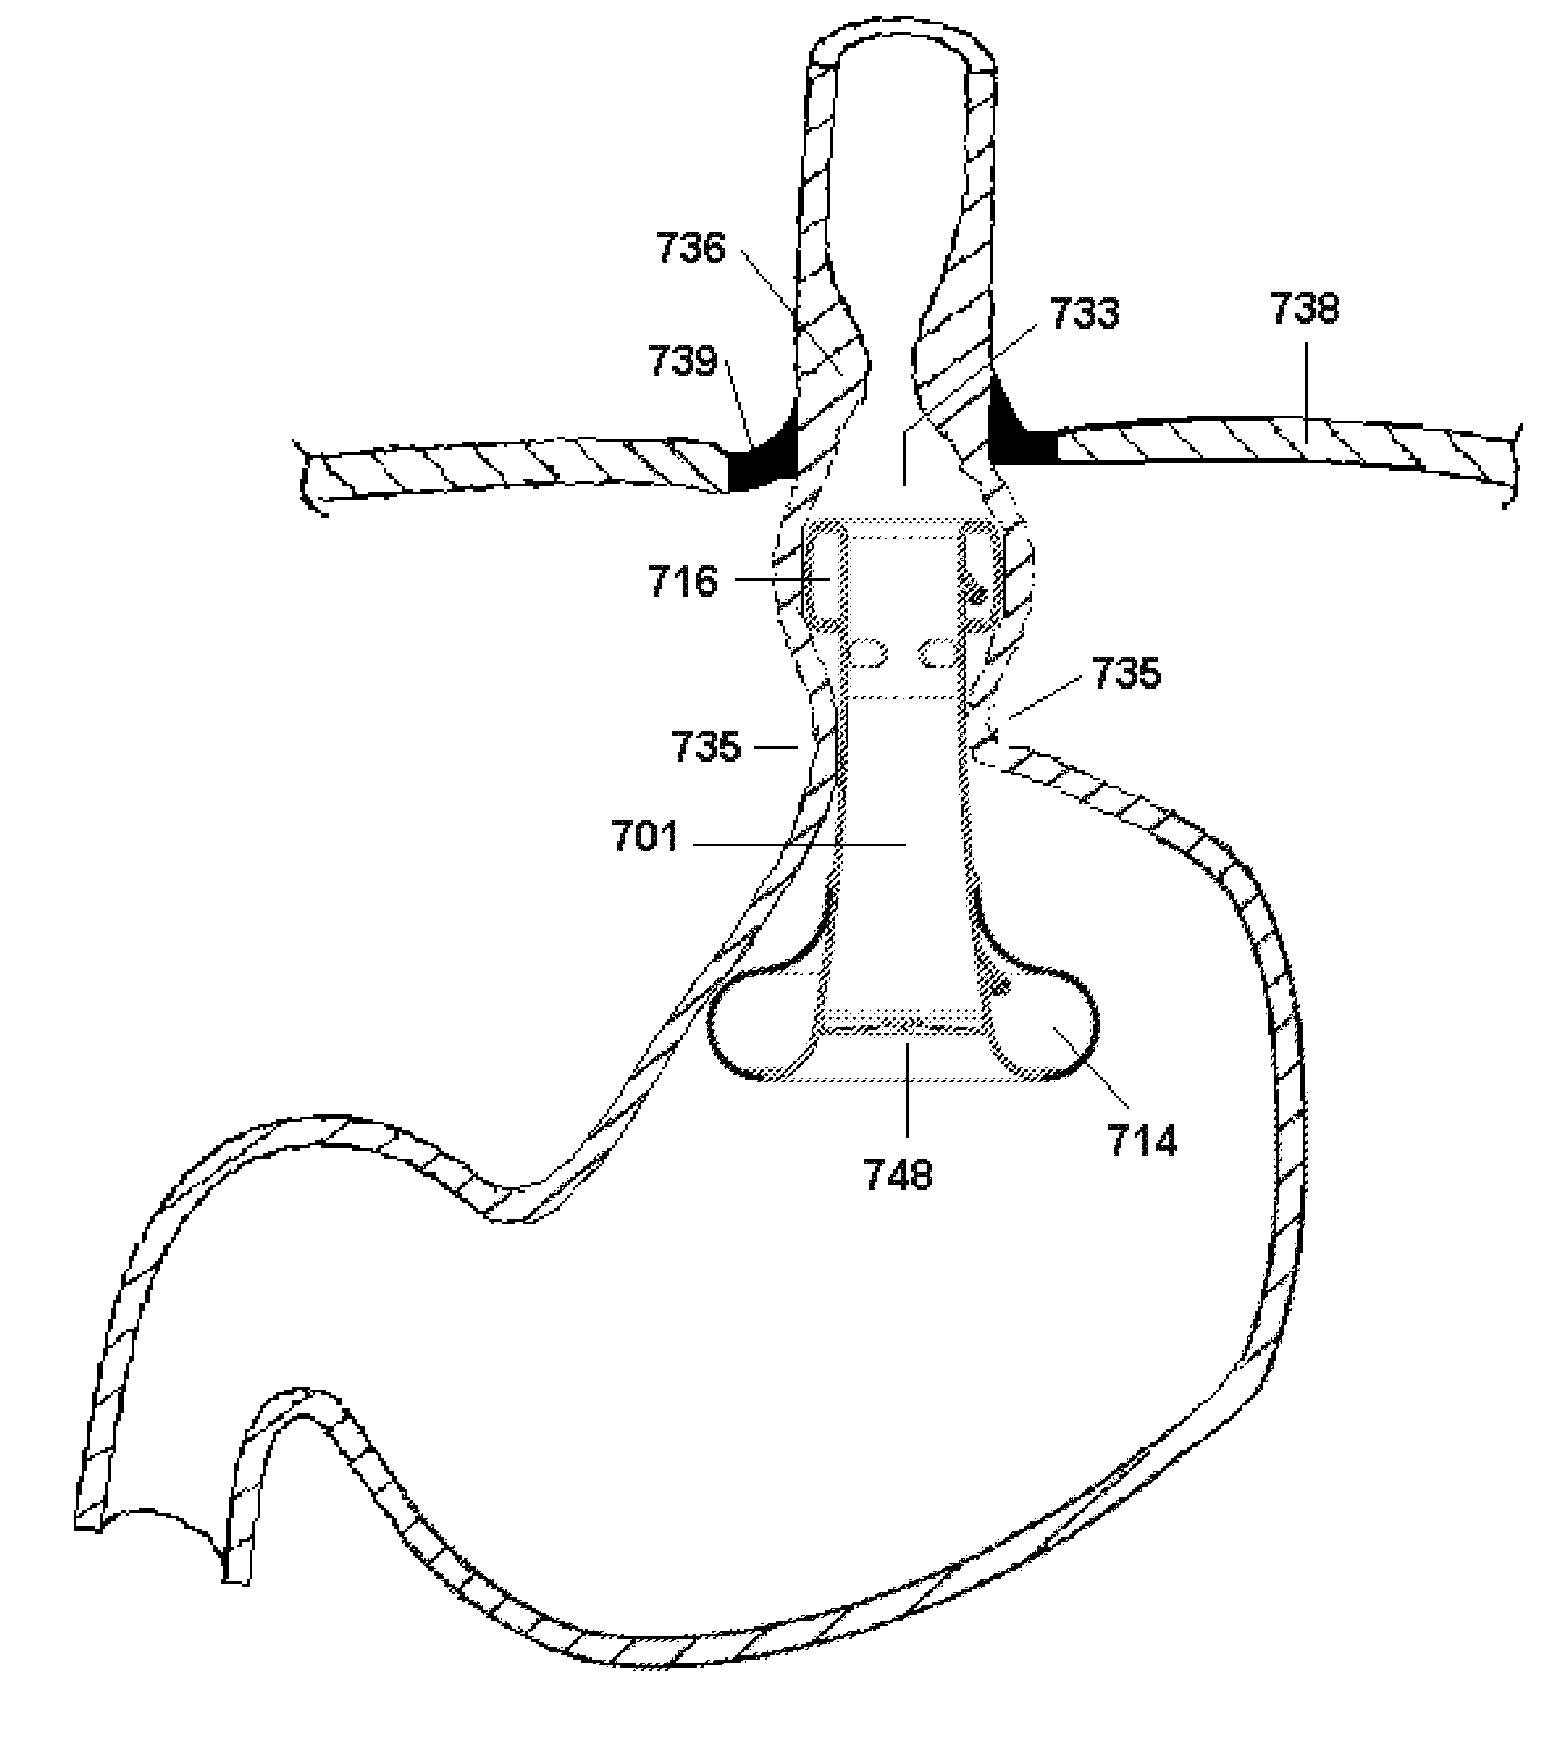 Anti-Reflux Devices and Methods for Treating Gastro-Esophageal Reflux Disease (GERD)